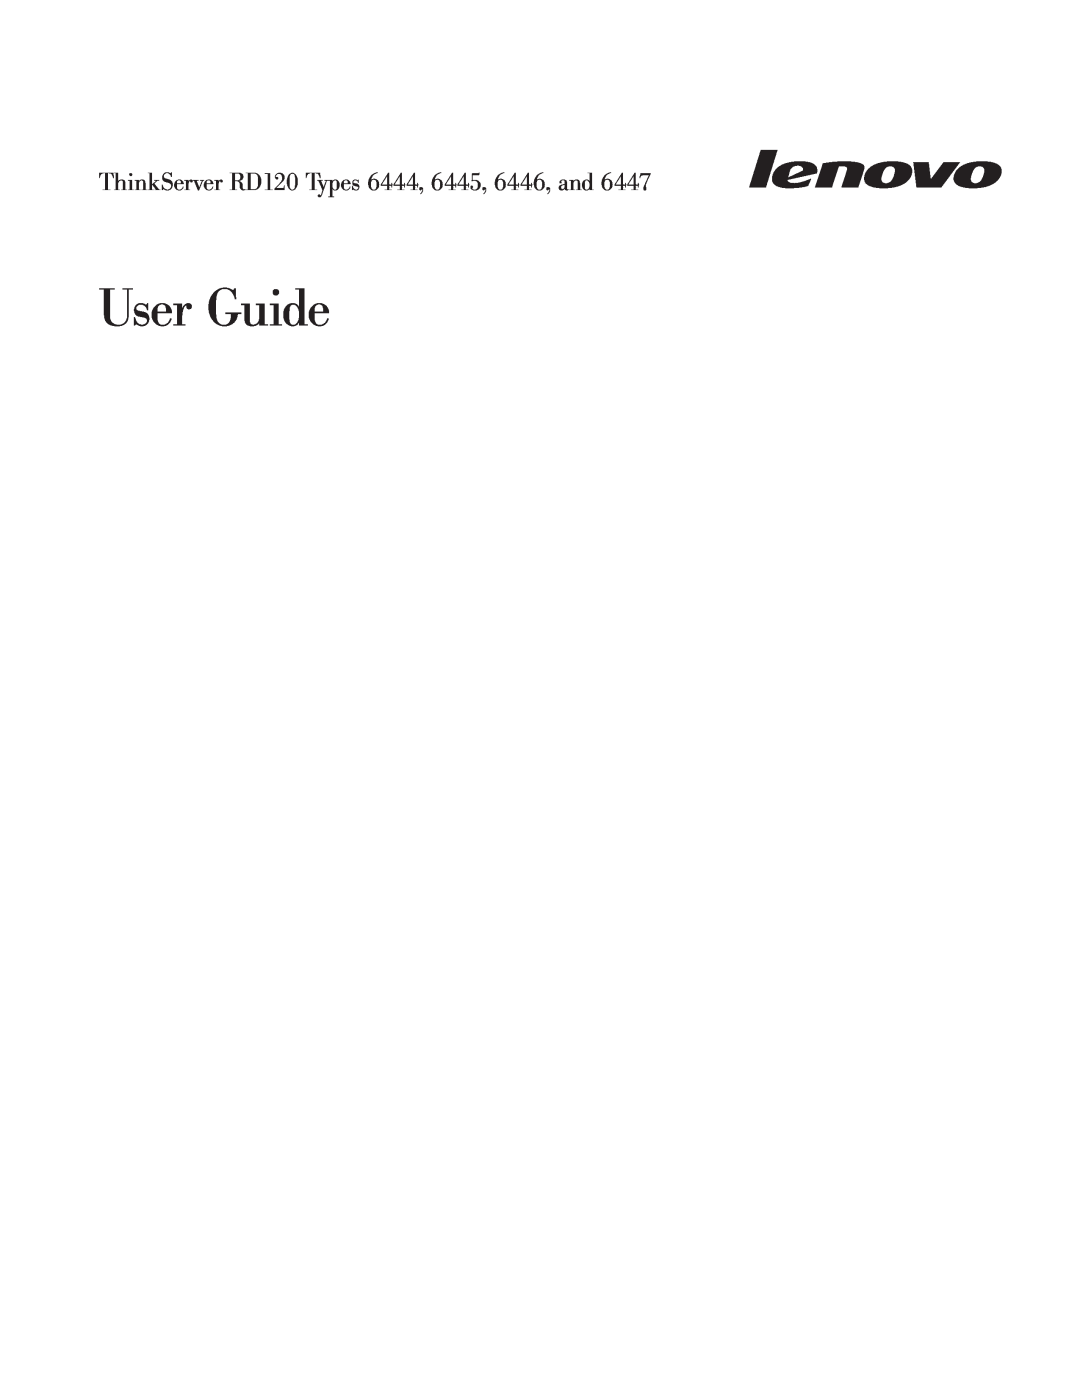 Lenovo manual User Guide, ThinkServer RD120 Types 6444, 6445, 6446, and 